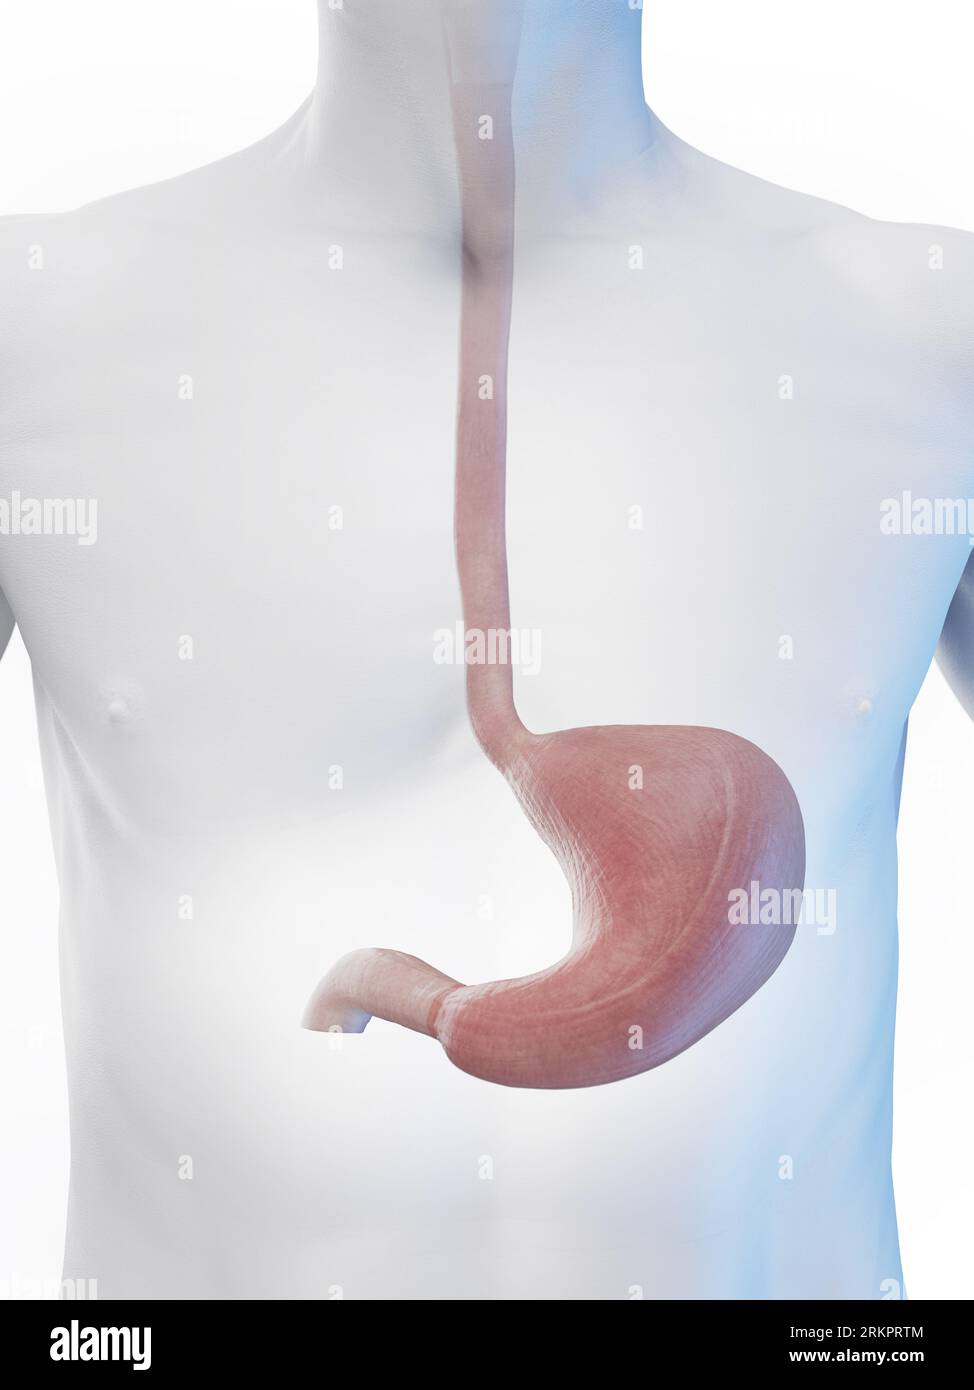 Stomach and oesophagus, illustration. Stock Photo